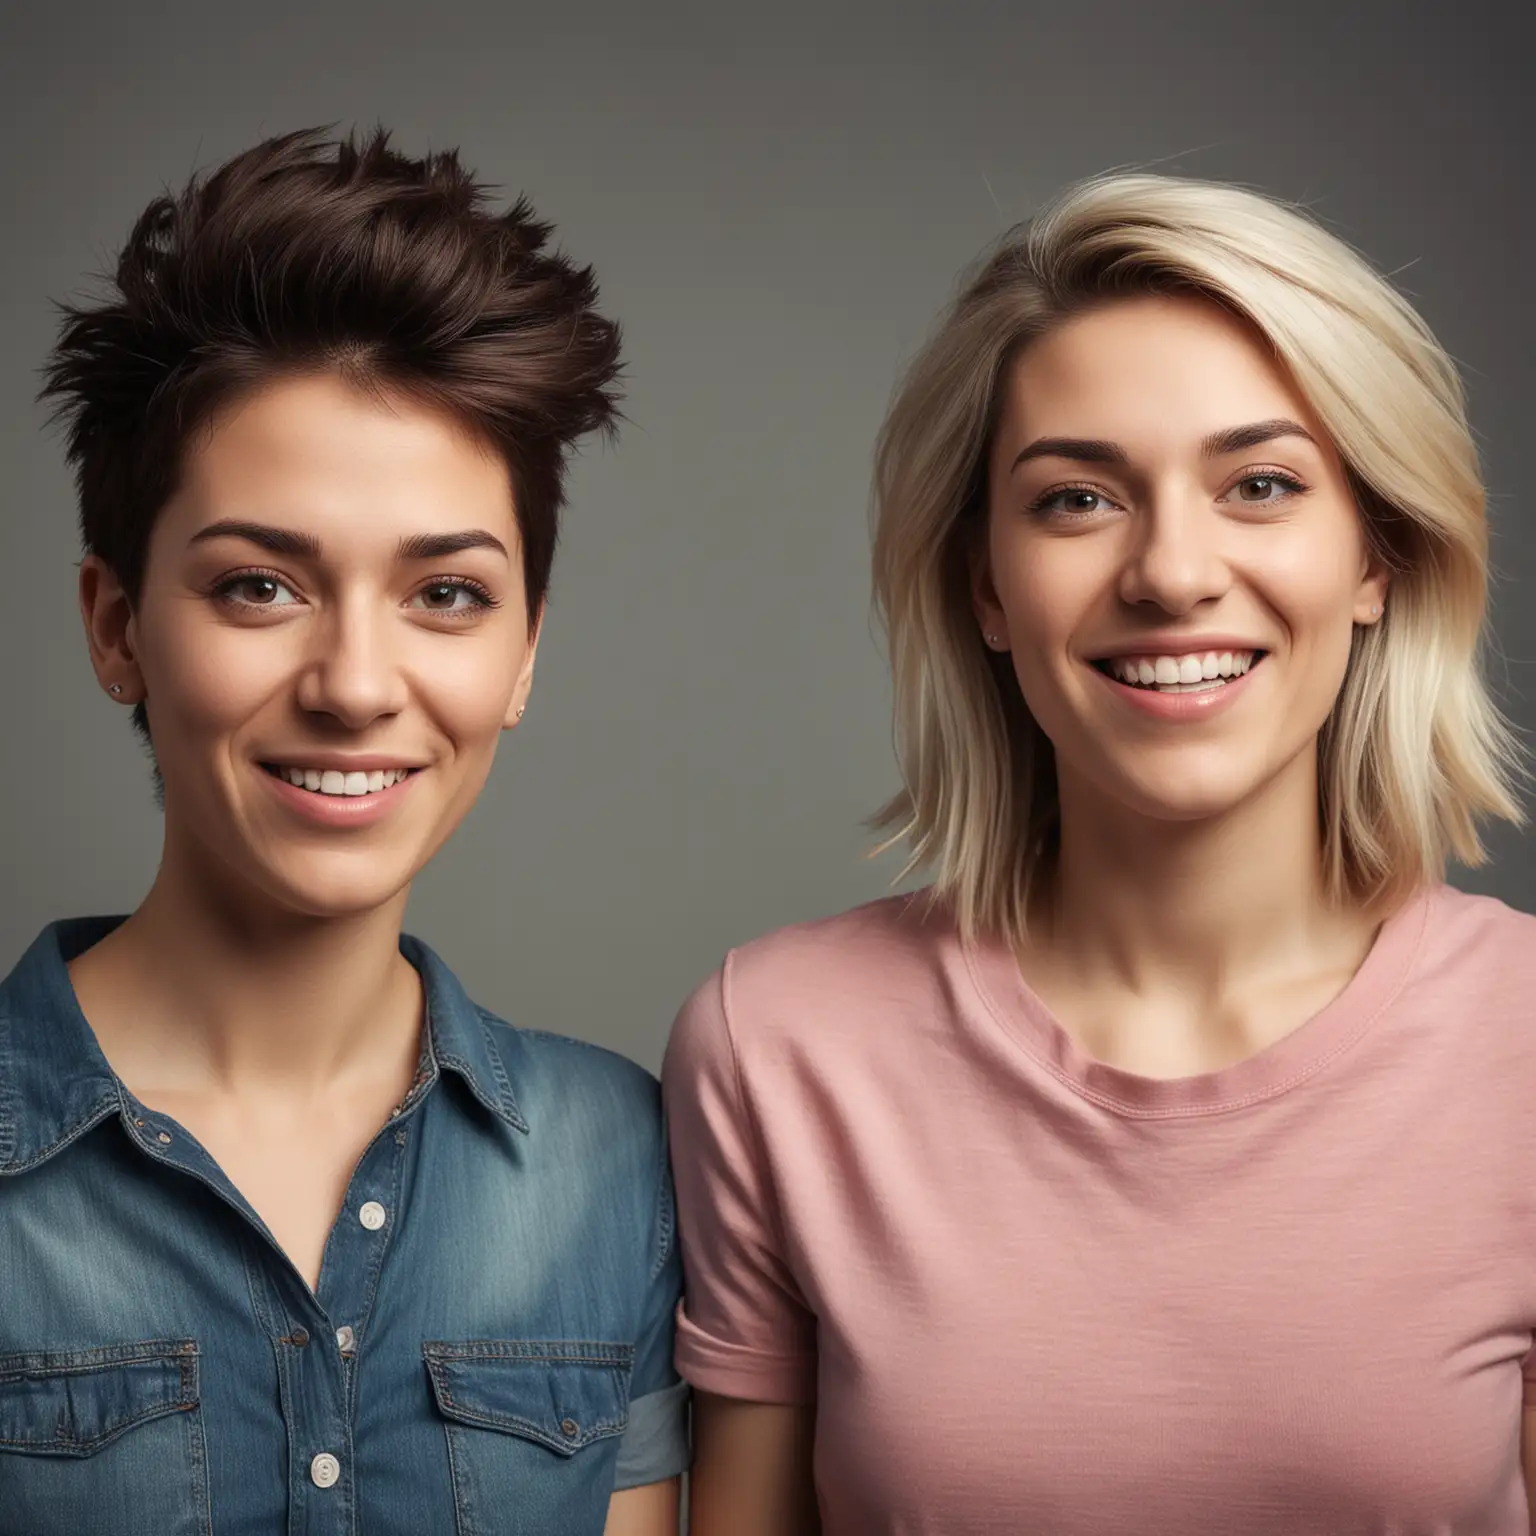 Please create a realistic image of two adult cis-gender female friends demonstrating human strengths and positive emotions